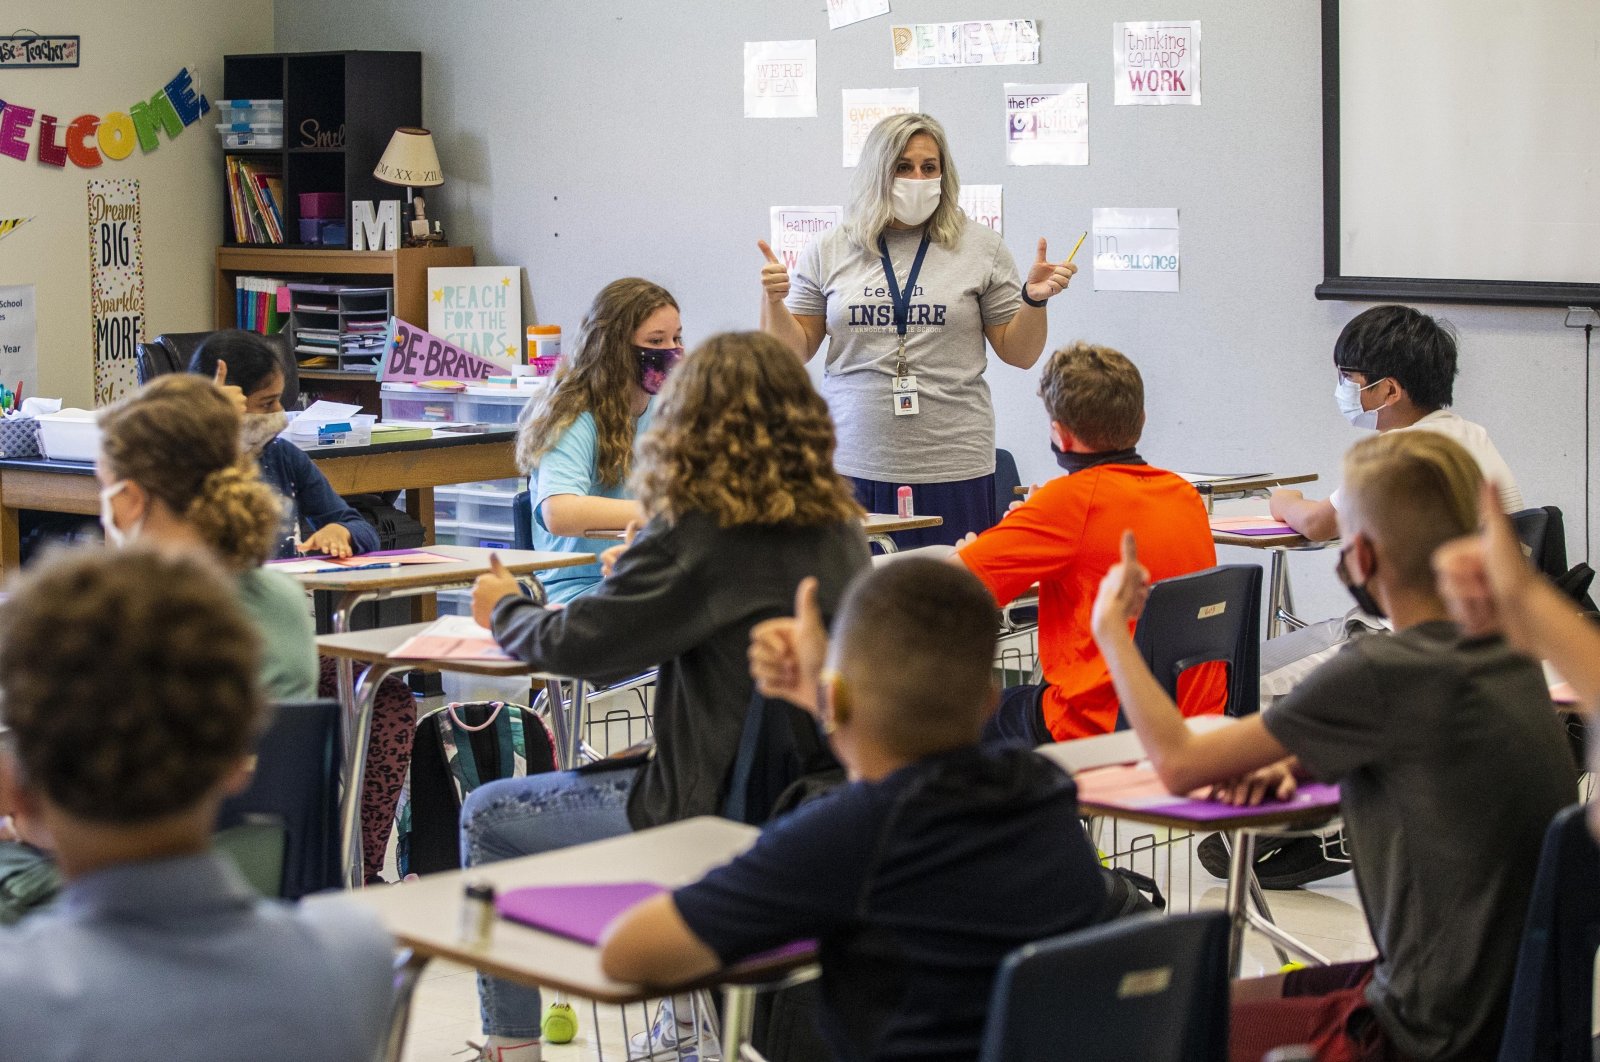 A teacher talks to her students on the first day of school at a middle school in Greensboro, U.S., Aug. 23, 2021. (AP Photo)